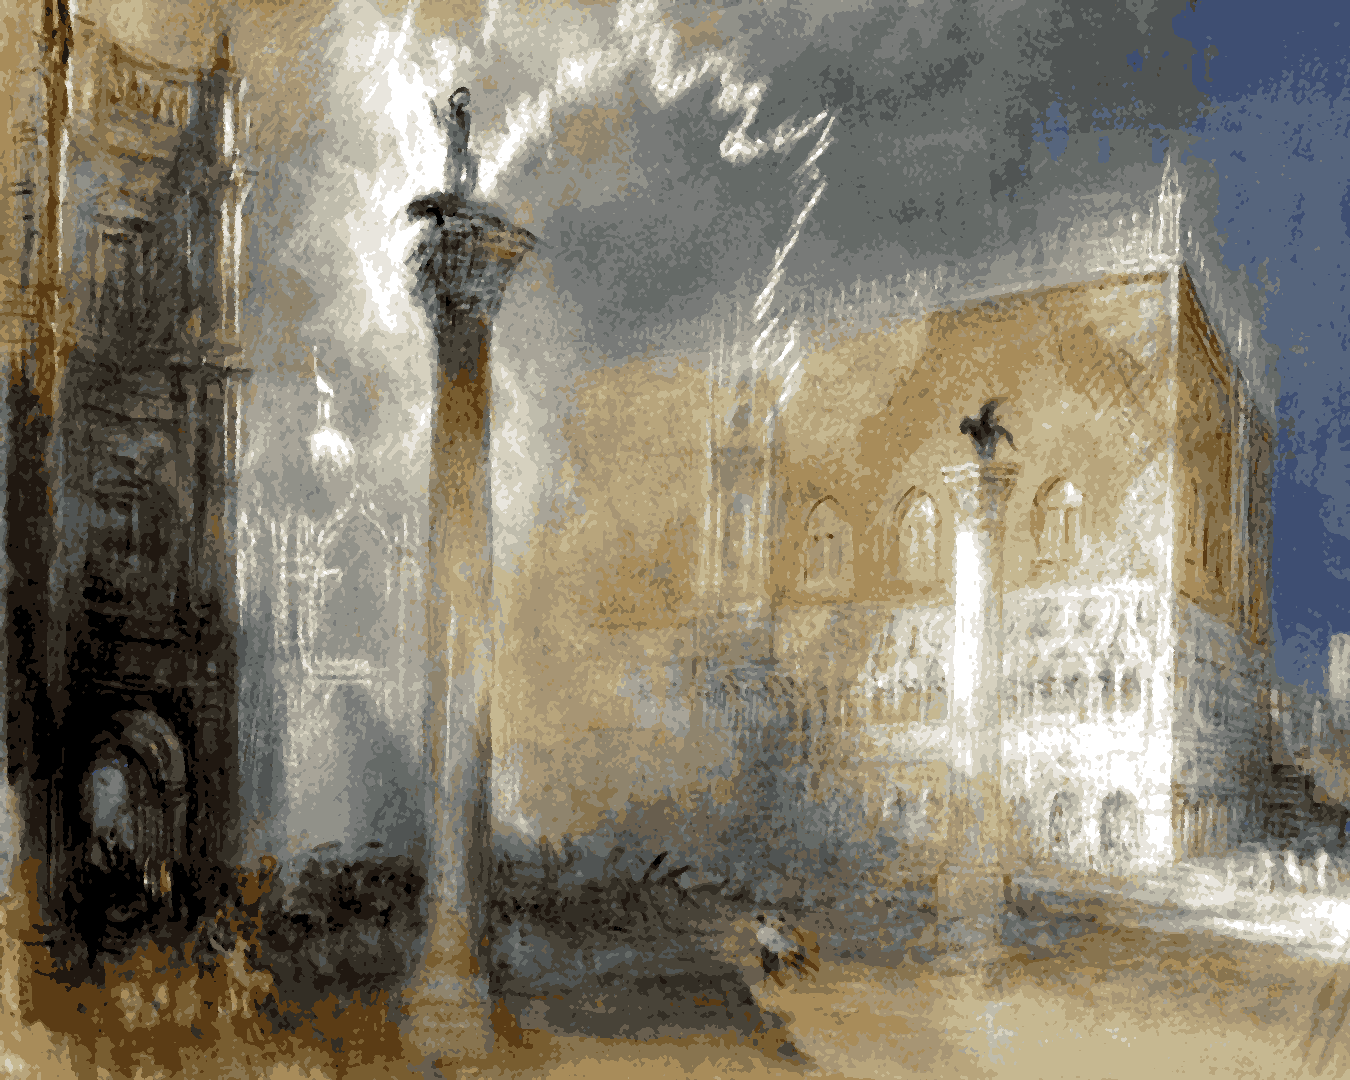 Venice, Italy Collection PD (41) - The Piazzetta by J. M. W. Turner - Van-Go Paint-By-Number Kit